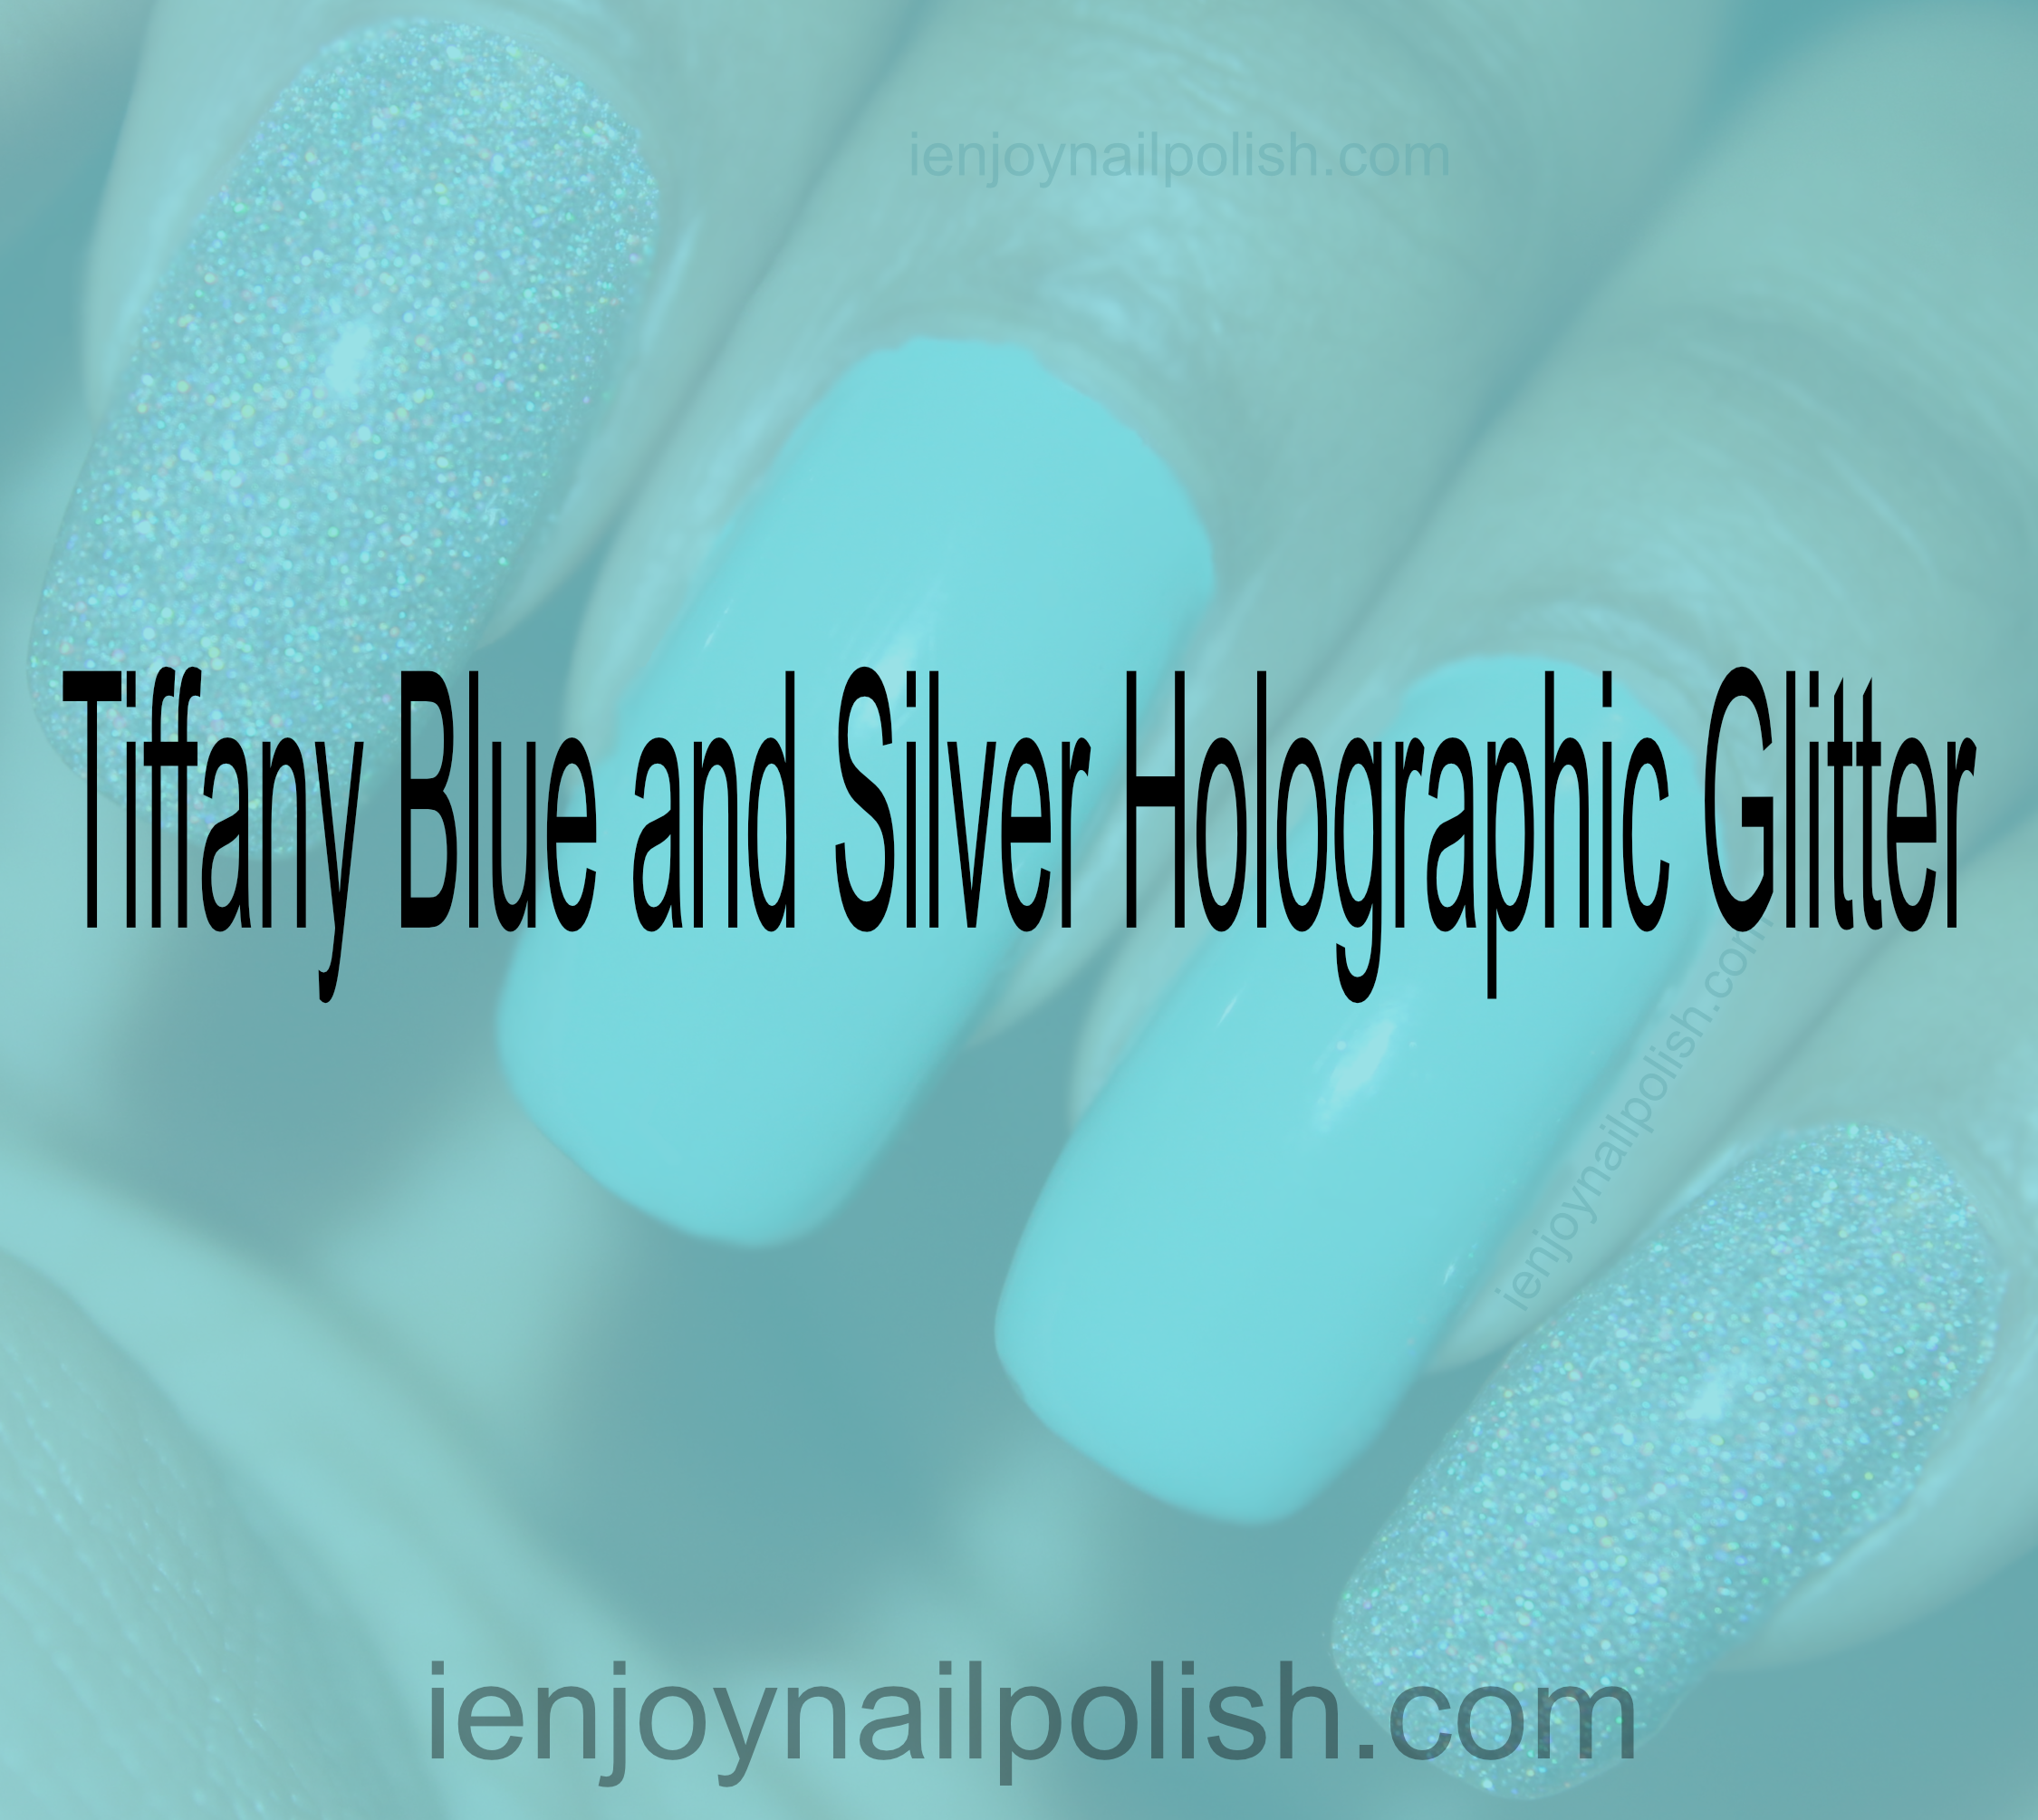 Tiffany Blue and Silver Holographic Glitter Cover